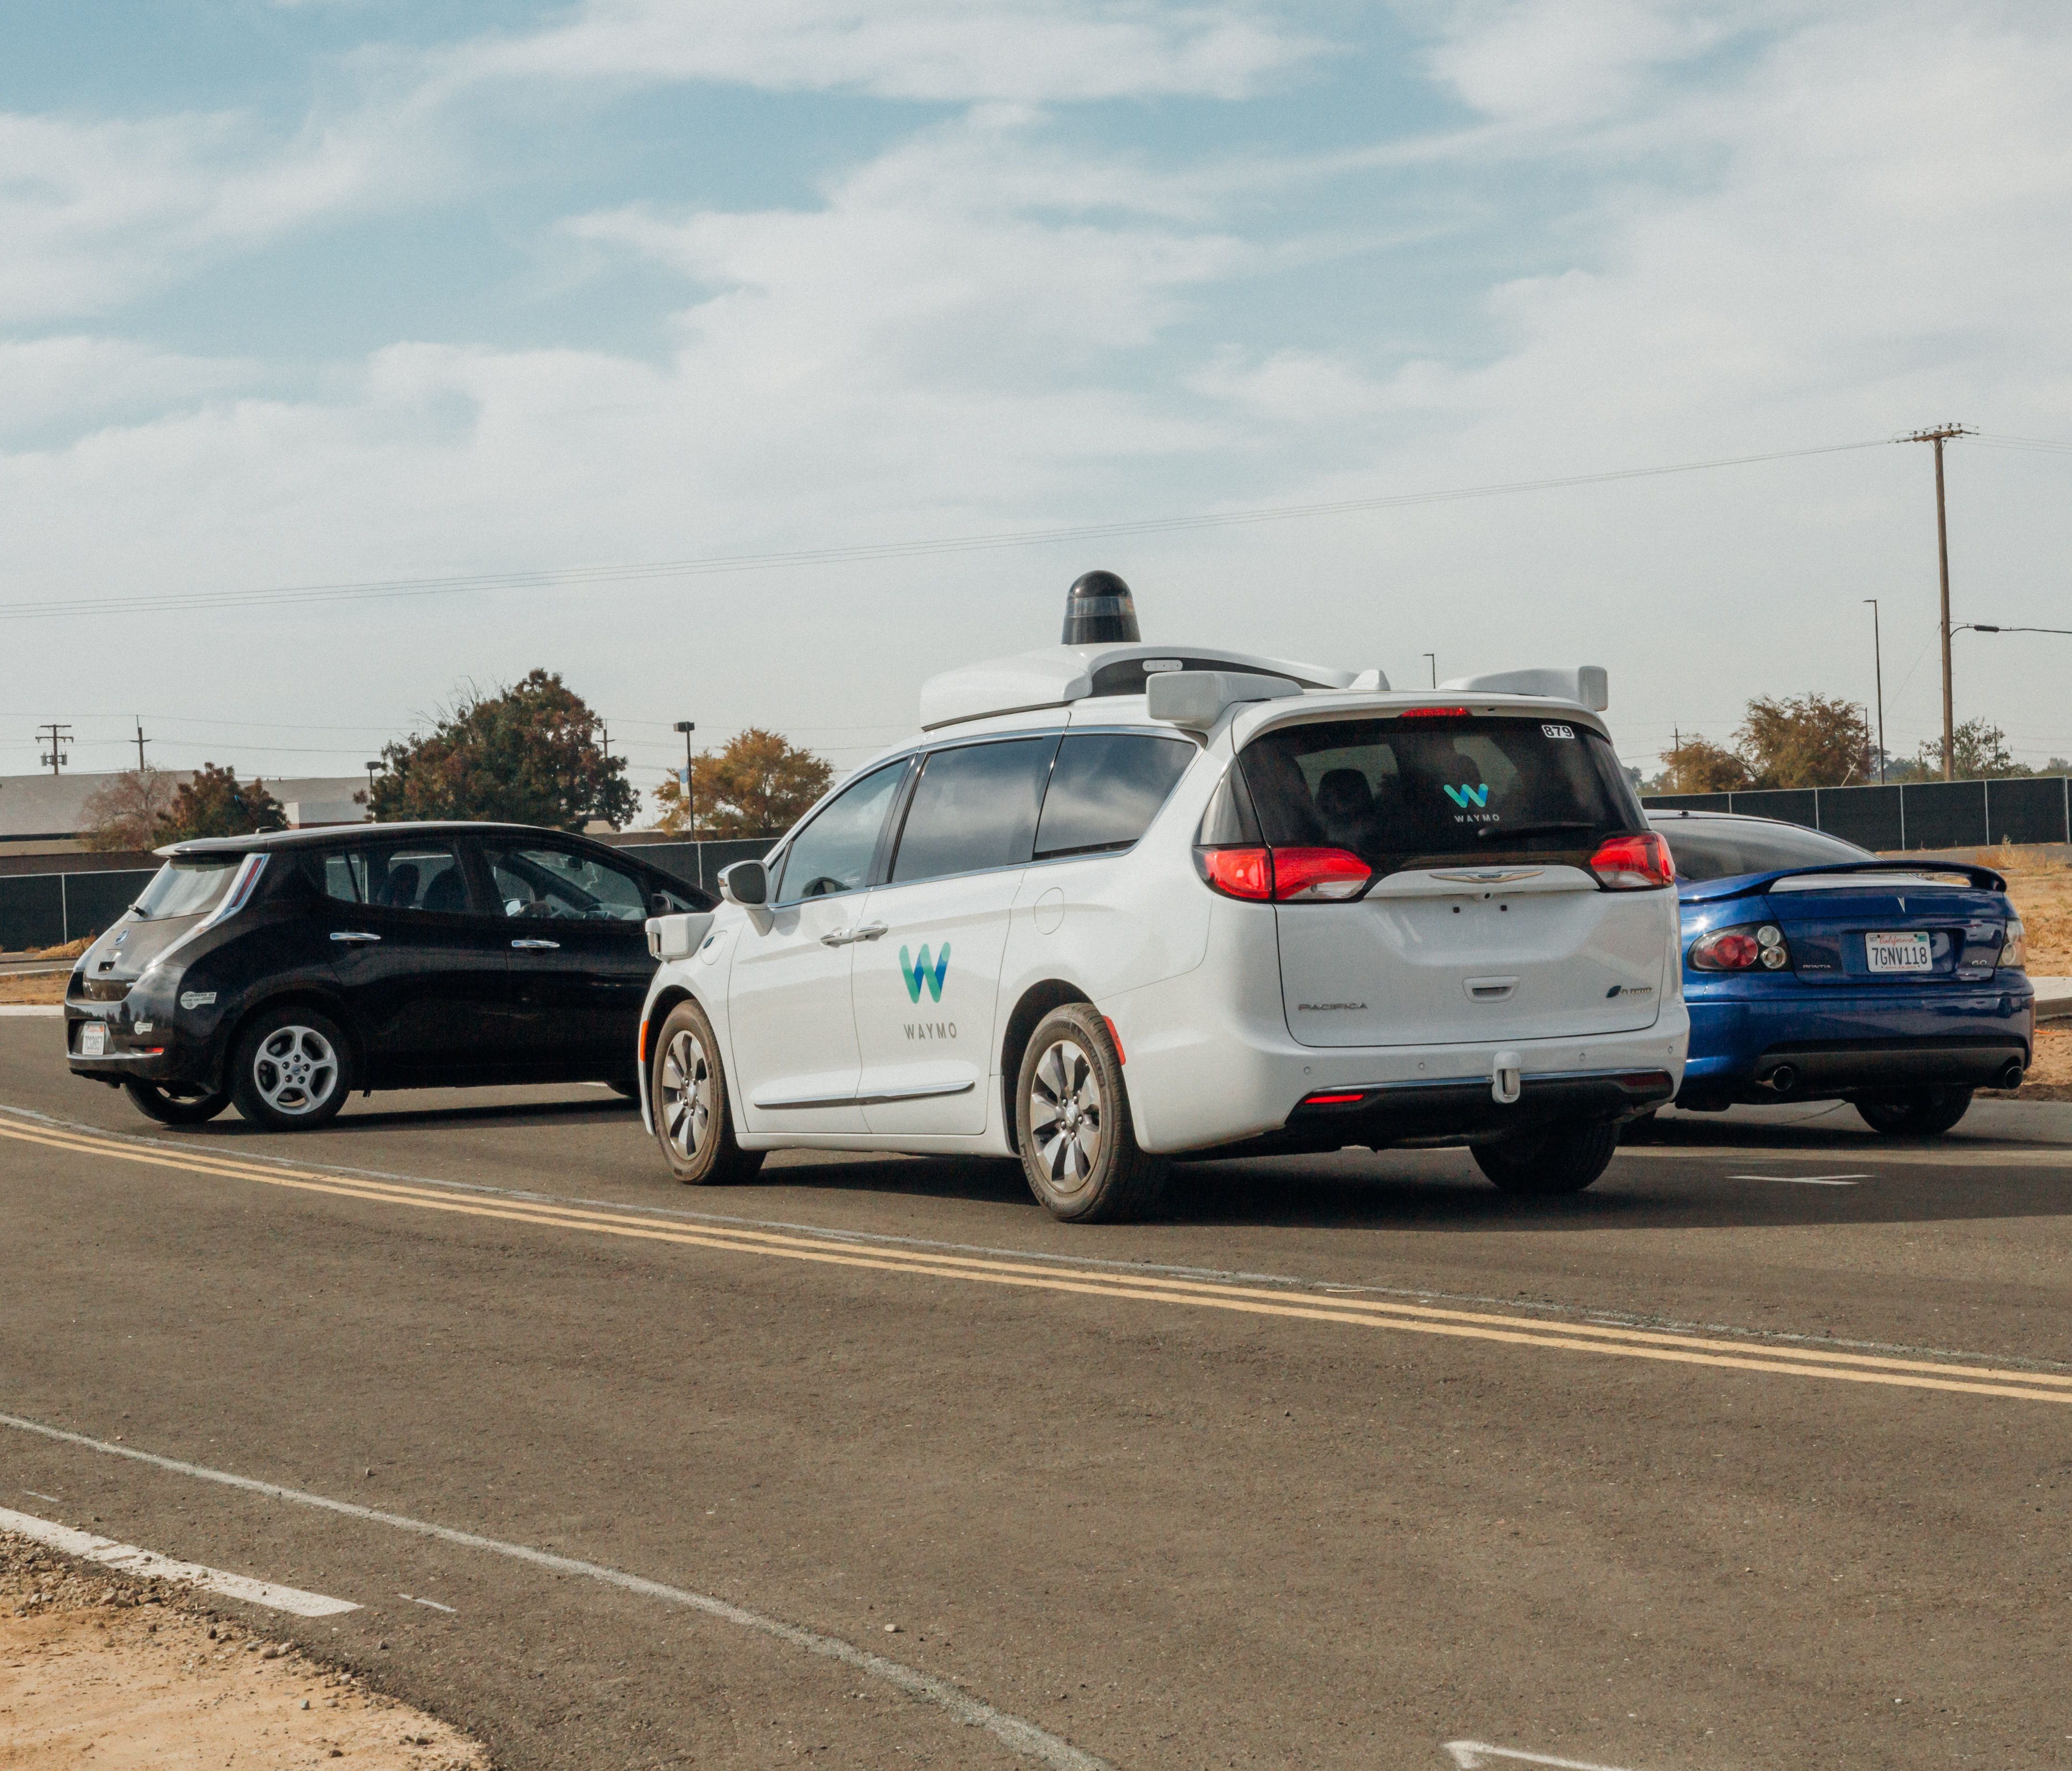 A Waymo minivan outfitted with self-driving sensors brakes suddenly for a black car that has backed out of a driveway without looking. The test was conducted at Waymo's testing facility in central California.